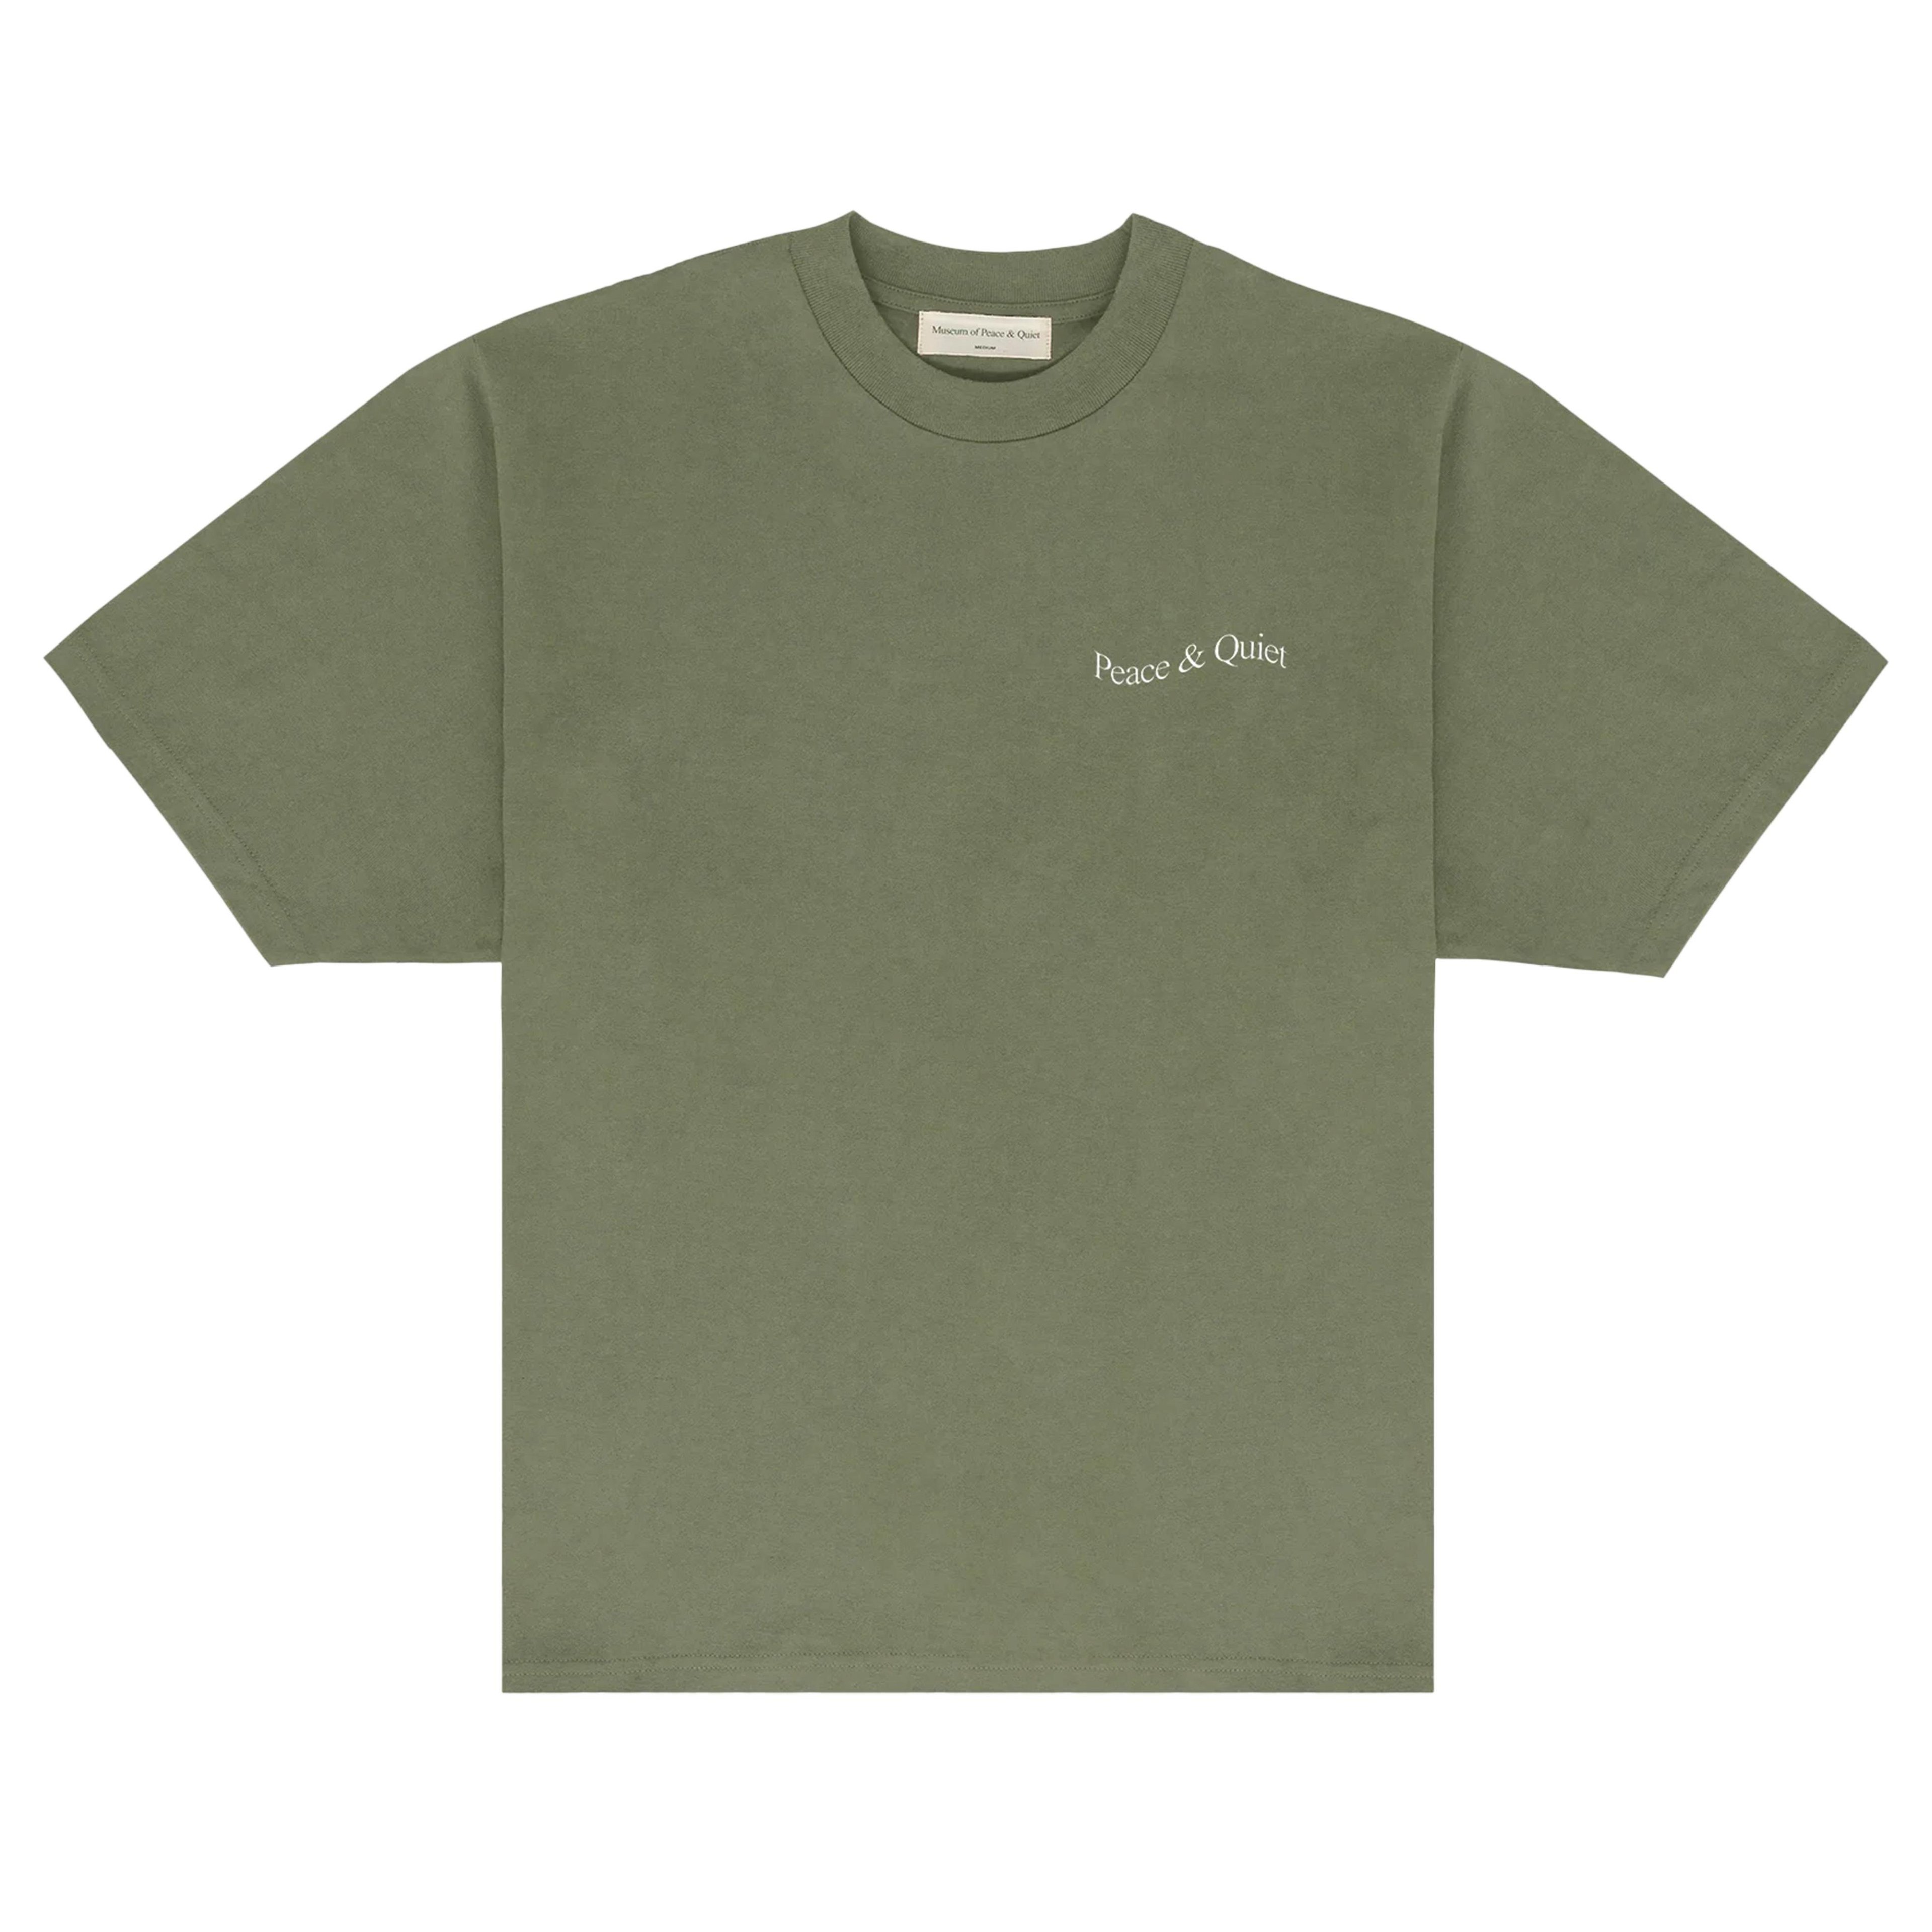 MUSEUM OF PEACE AND QUIET - Wordmark T-Shirt - (Olive) by MUSEUM OF PEACE&QUIET